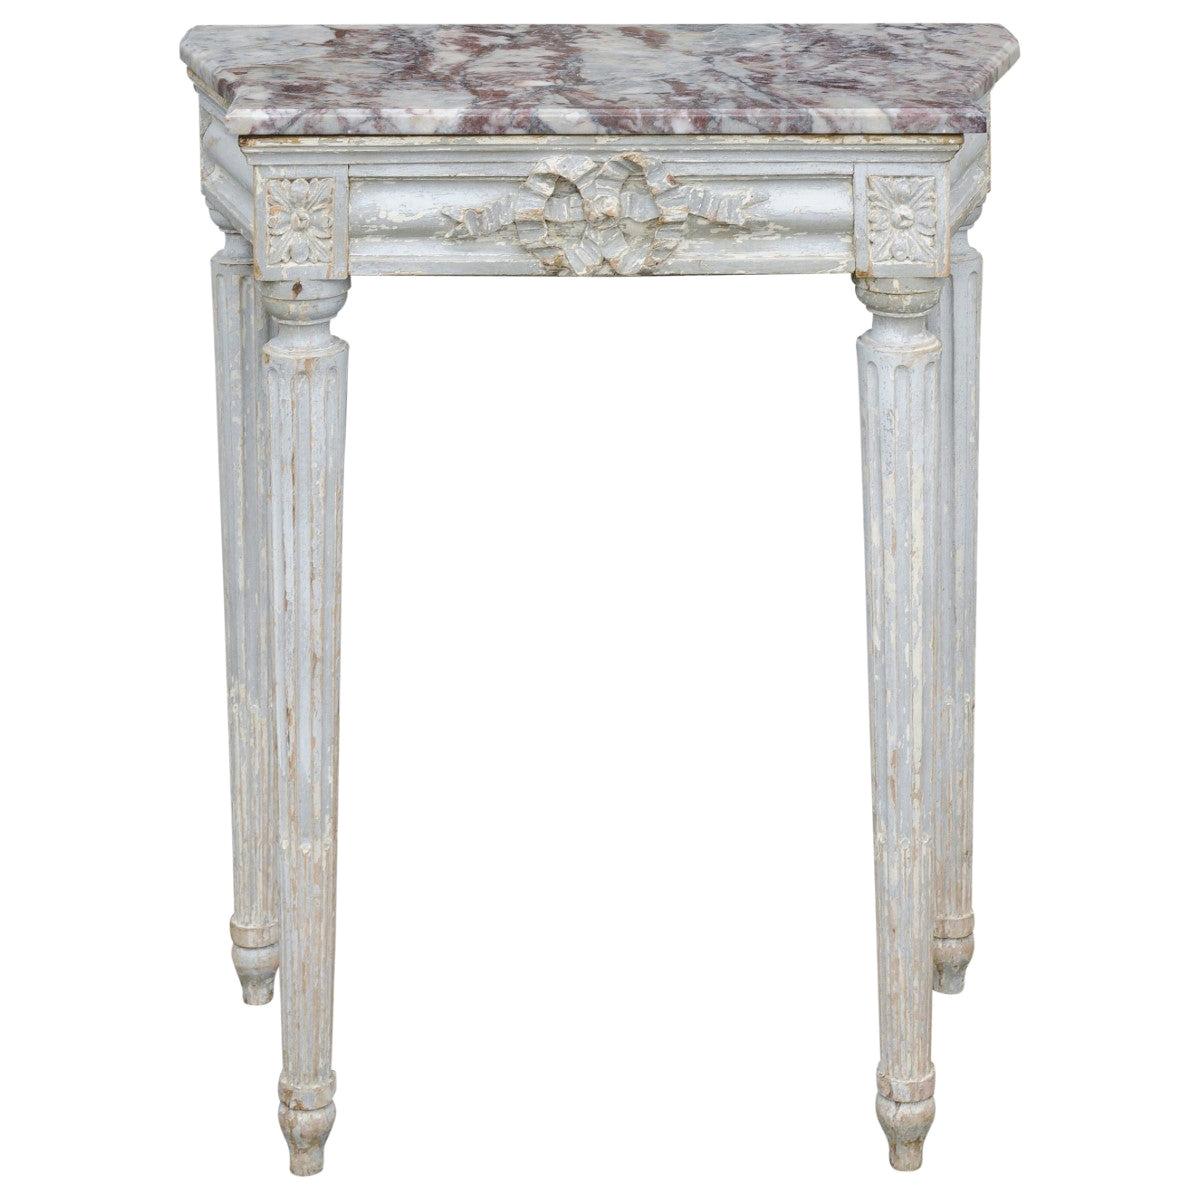 French Neoclassical Period 1800s Painted Wood Console Table with Marble Top